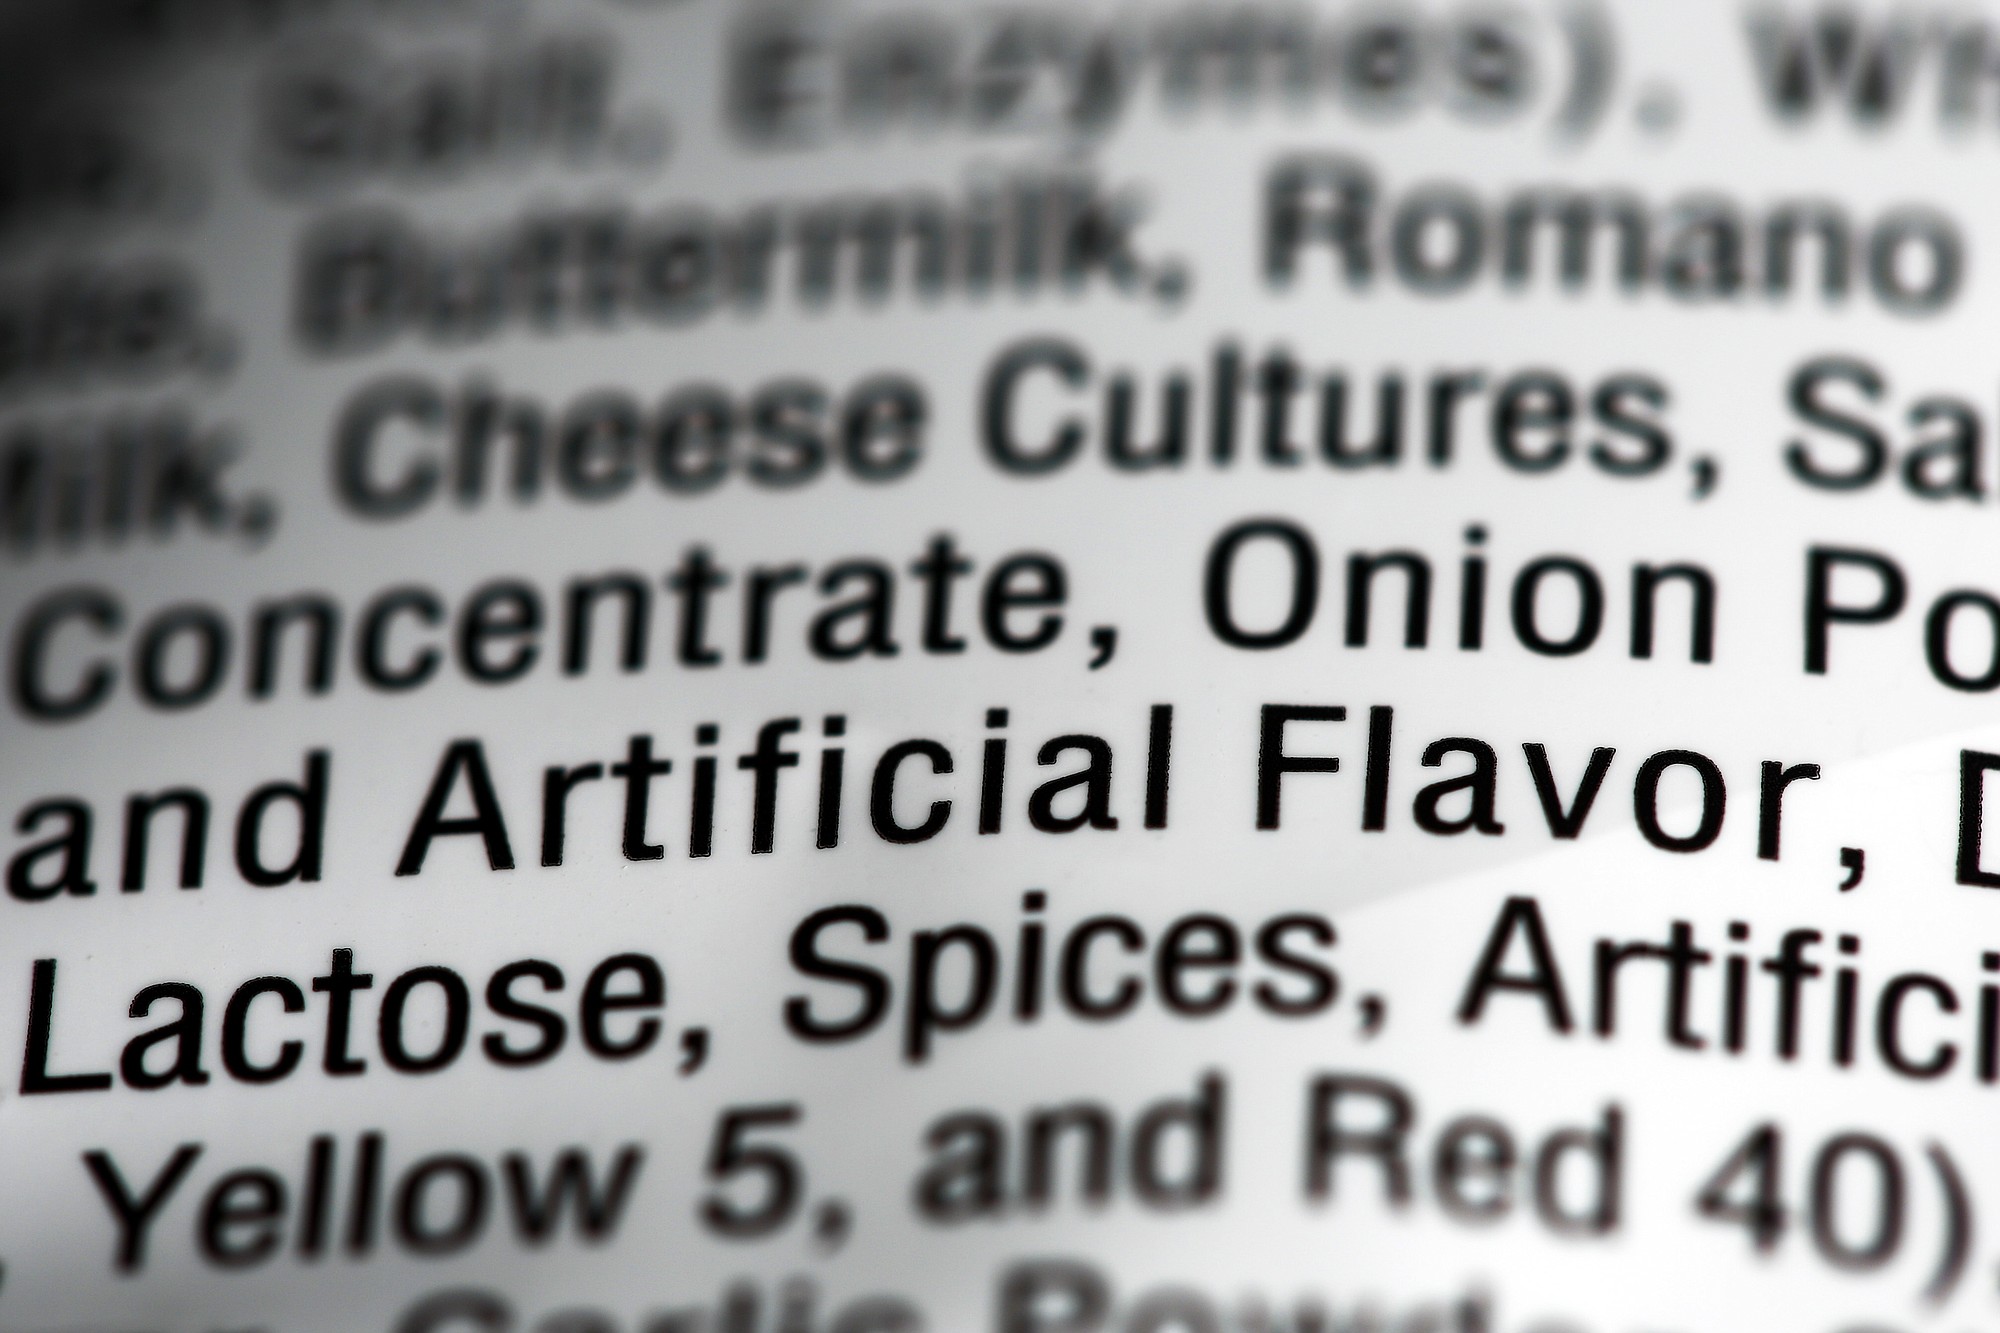 The ingredient &quot;Artificial Flavor&quot; is seen on a label on a bag of Nacho Cheese flavored Doritos, in Philadelphia.